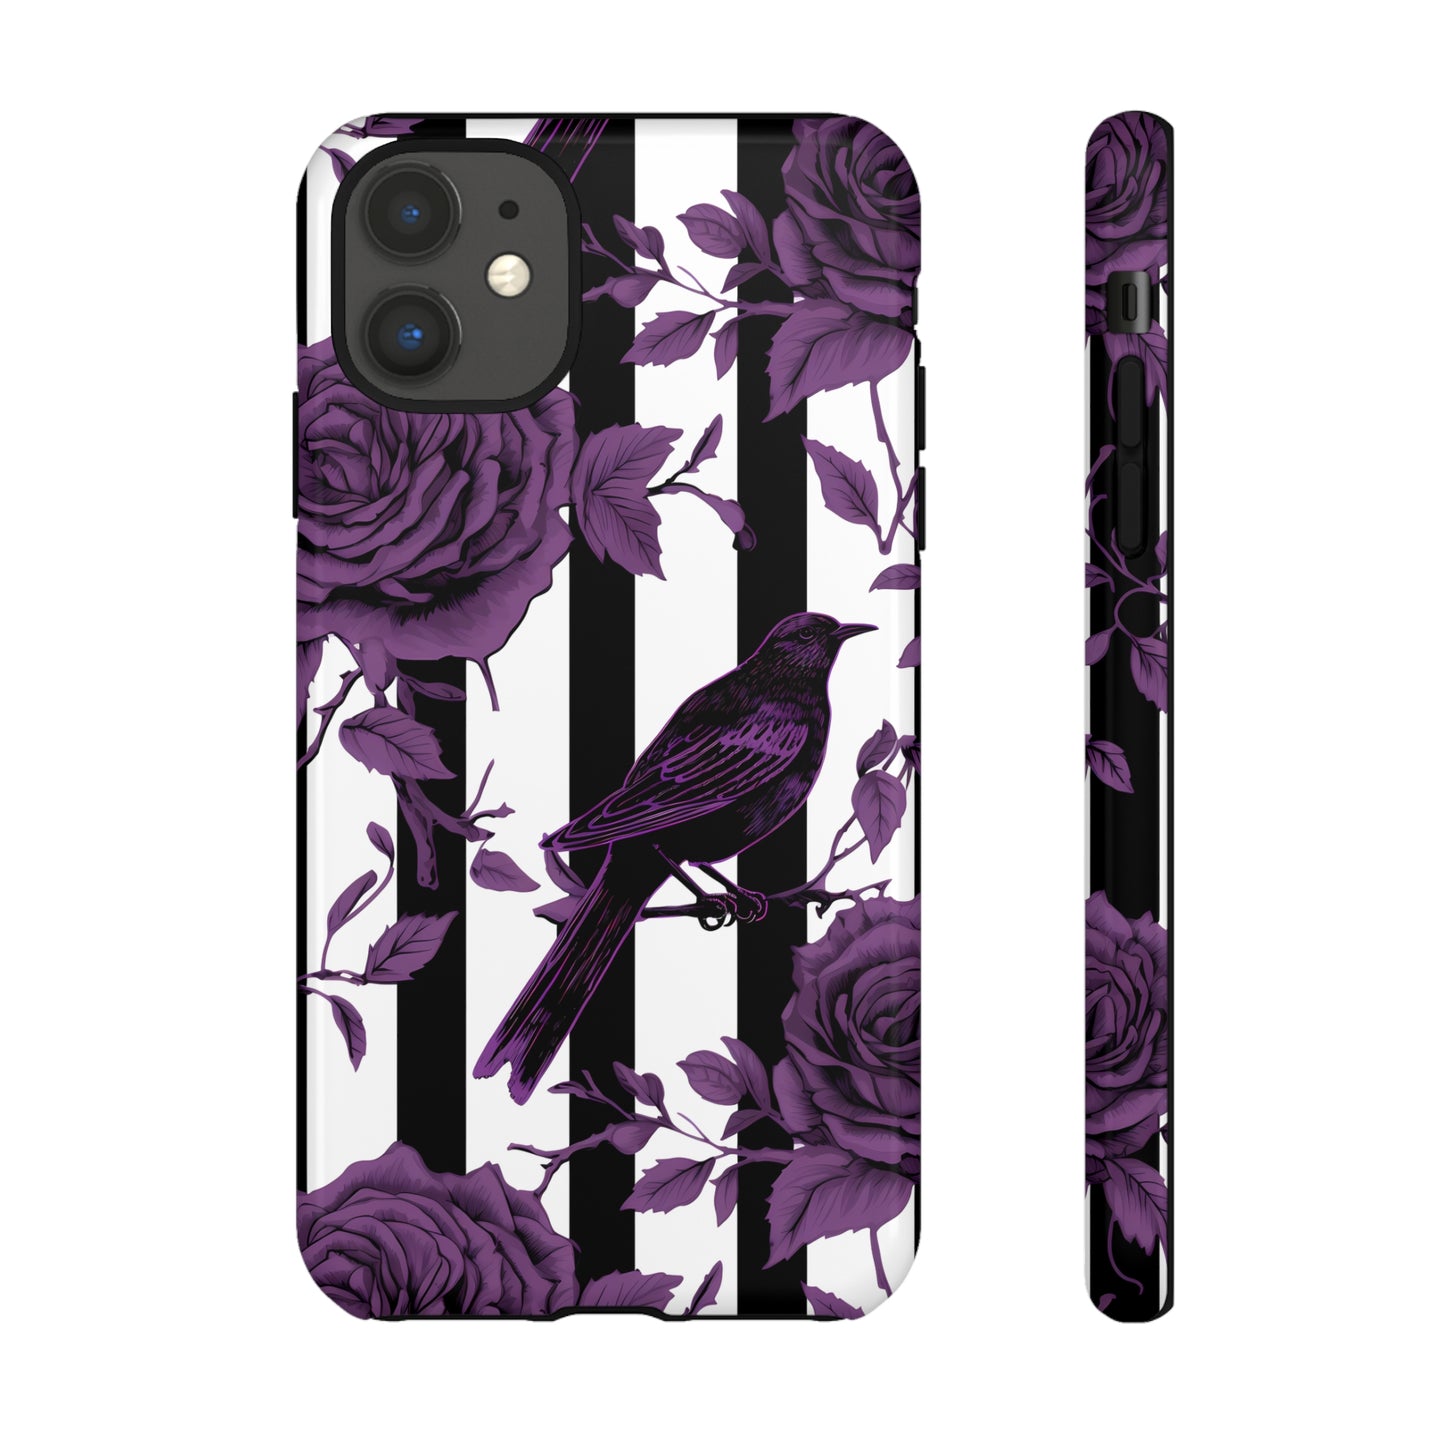 Striped Crows and Roses Tough Cases for iPhone Samsung Google PhonesPhone CaseVTZdesignsiPhone 11GlossyAccessoriescrowsGlossy